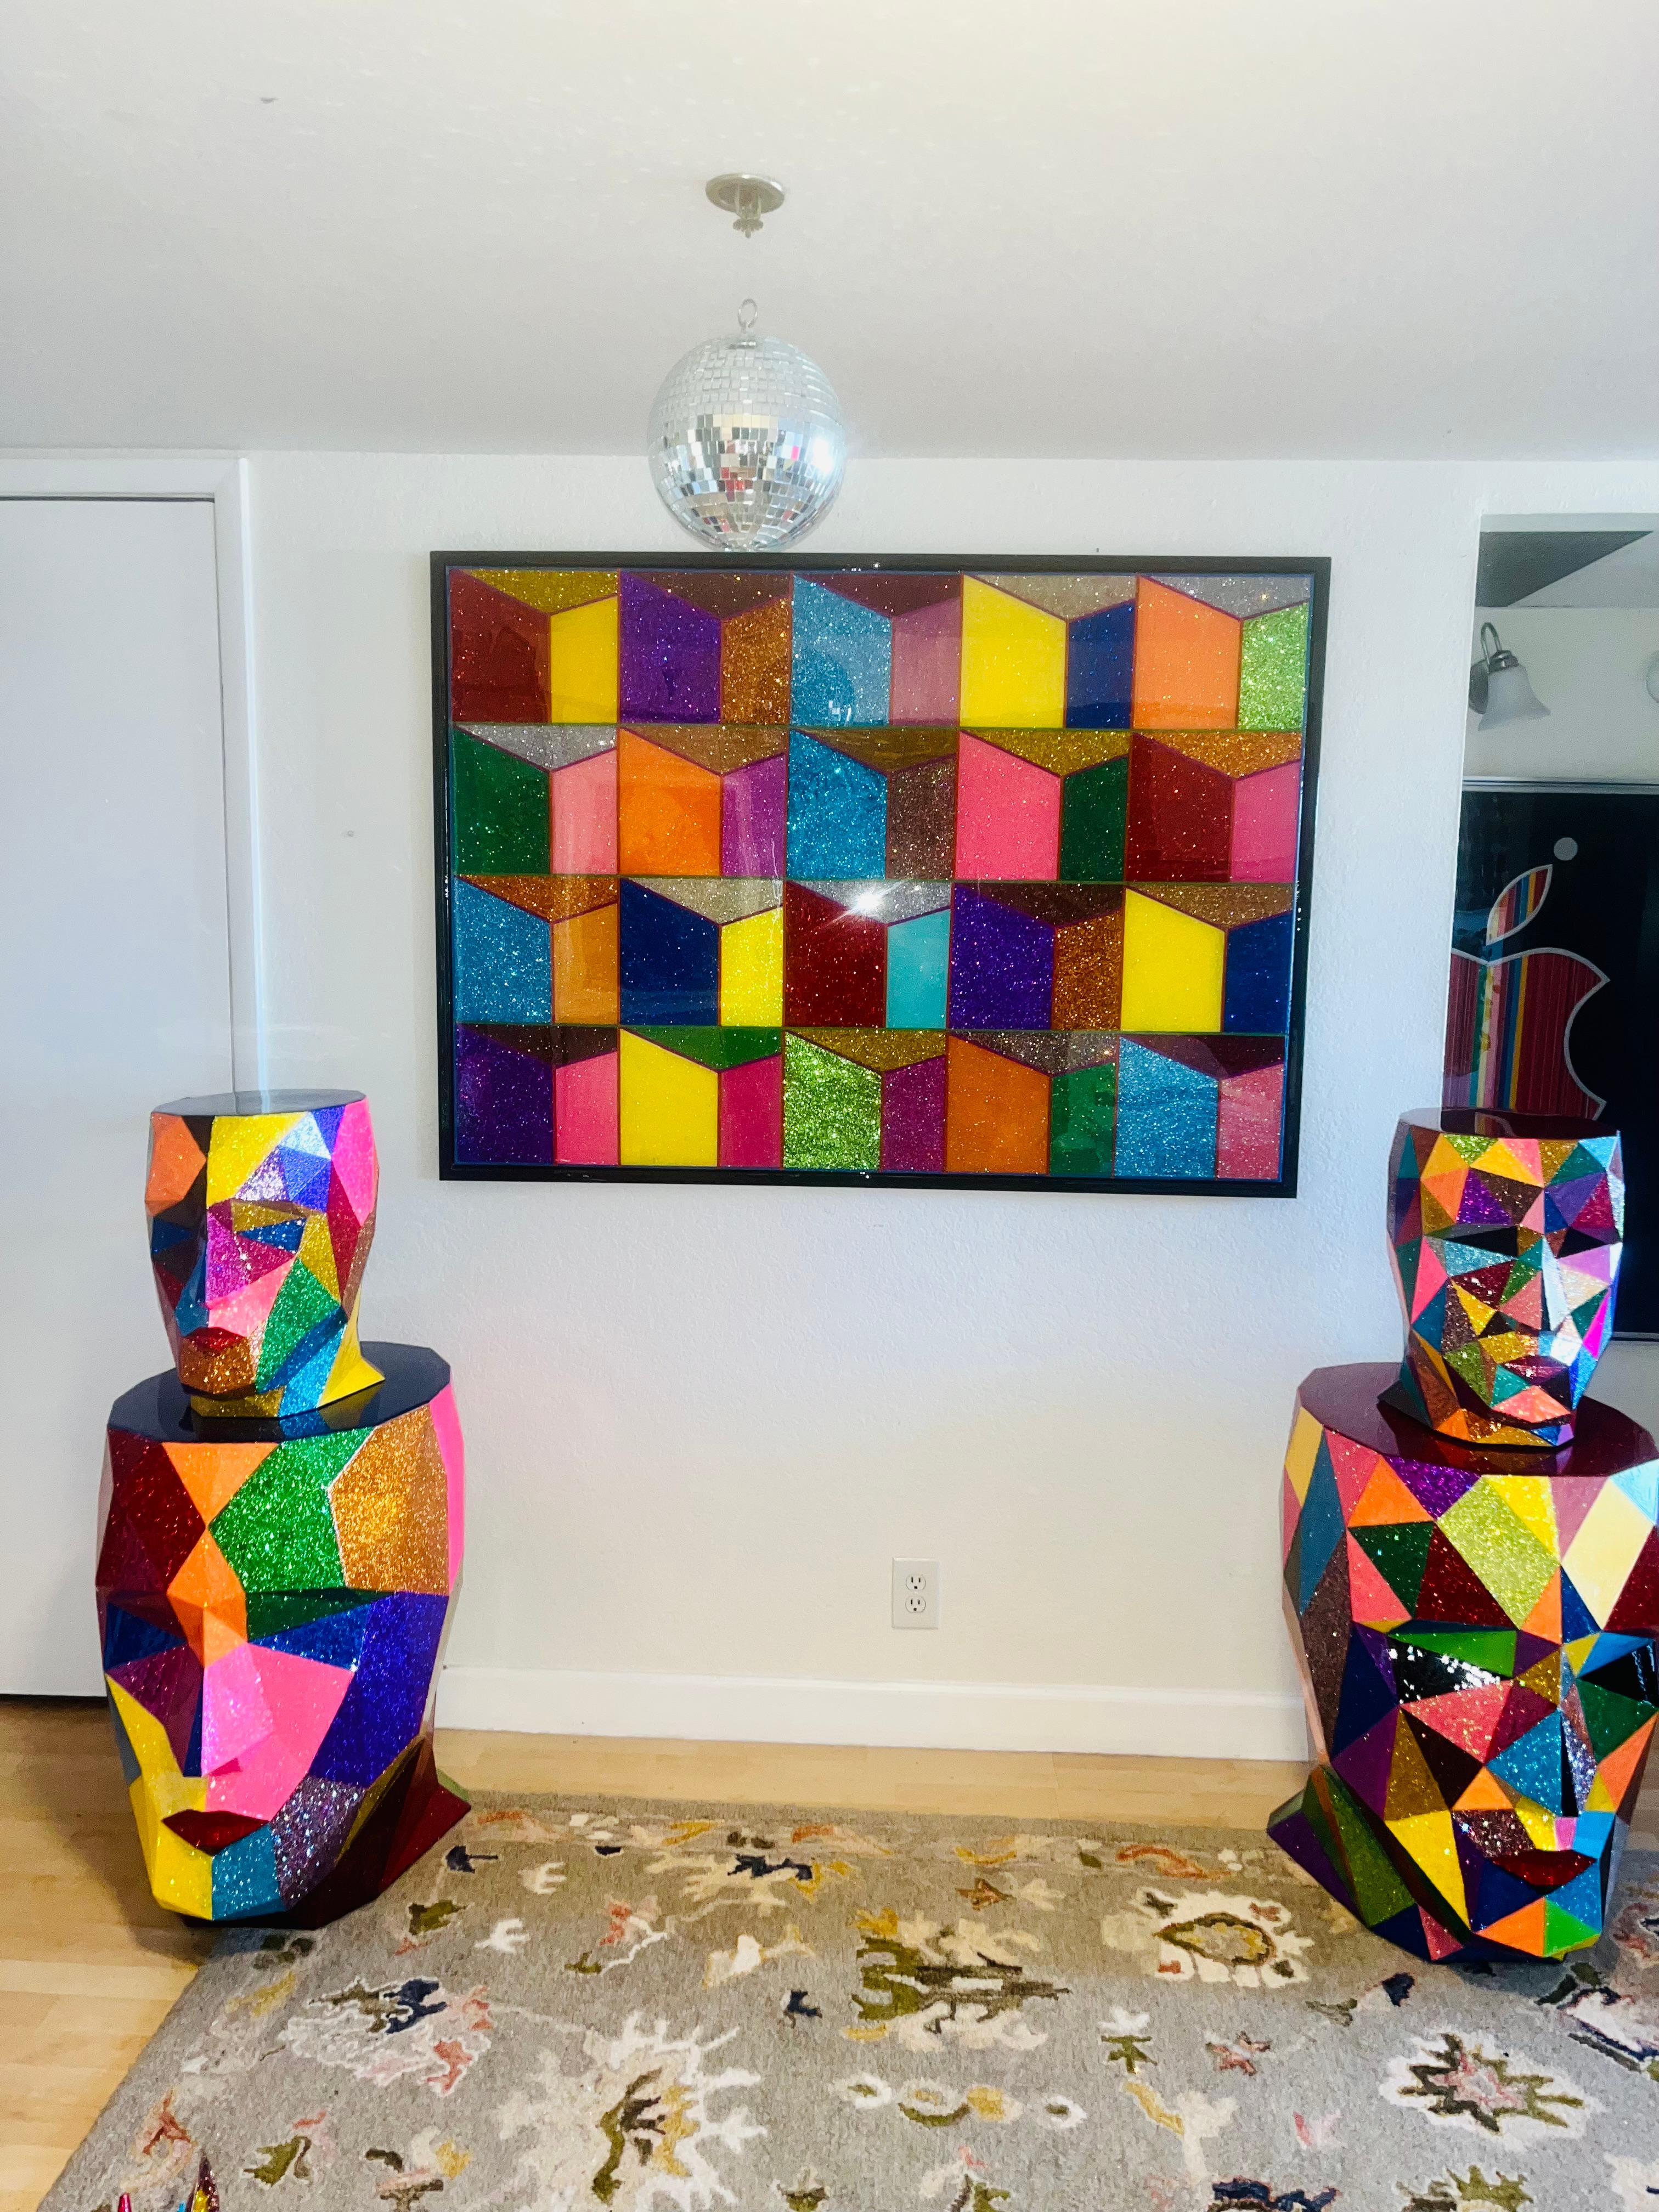 WORLD'S HAPPIEST ROOM (7 Original Pieces - ALL One Of A Kind Art Installation) - Abstract Geometric Mixed Media Art by Mauro Oliveira